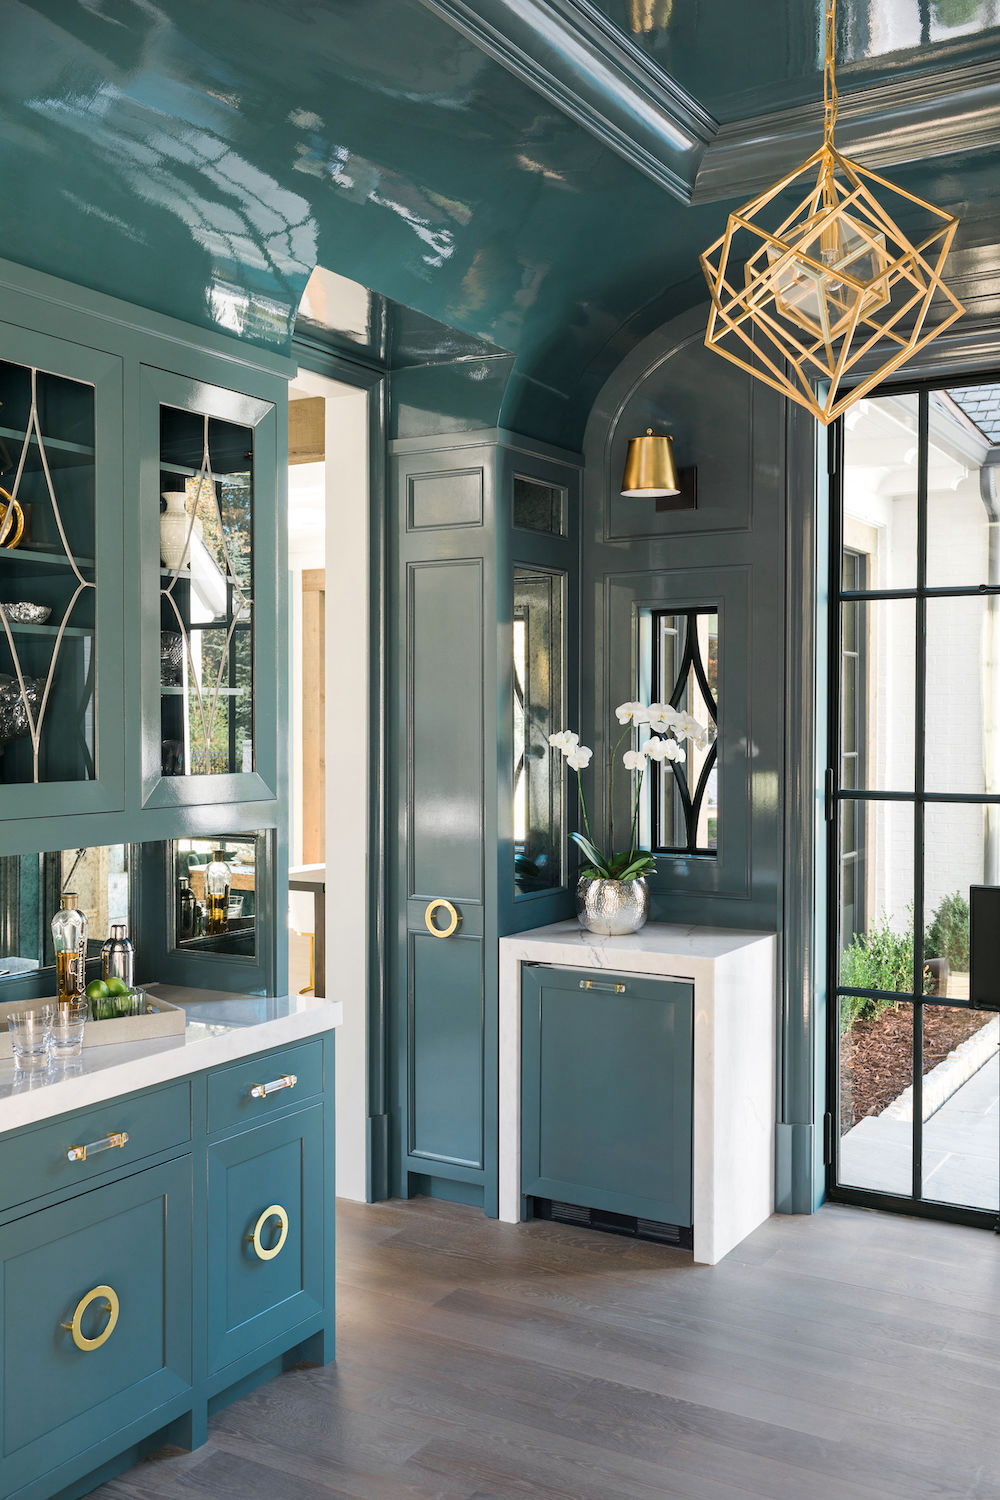 teal bar cabinets with white countertops and gold accents and lighting. Construction Resources provided countertop fabrication and installation.